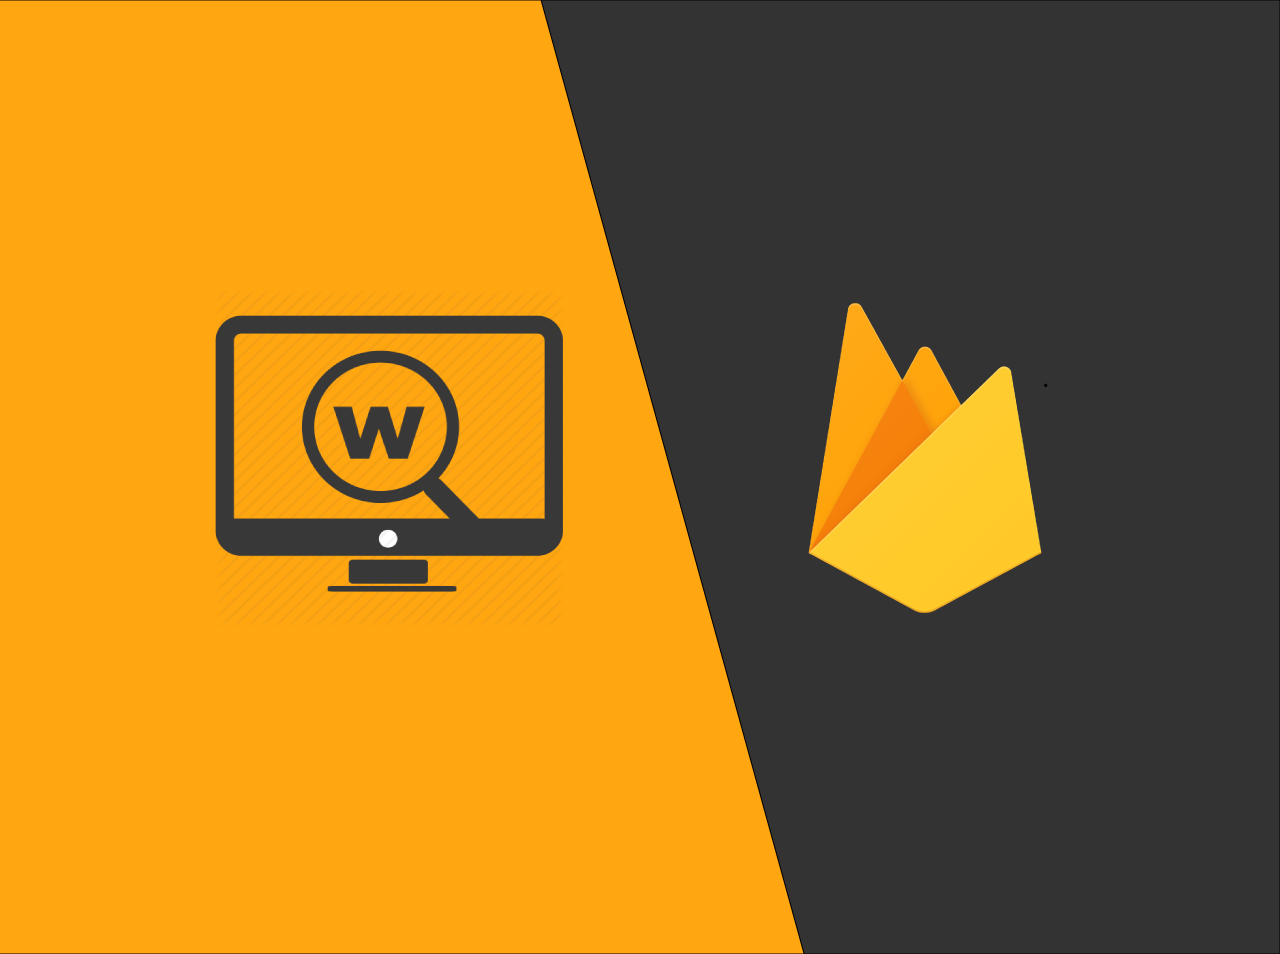 How to host static website on Google firebase for free